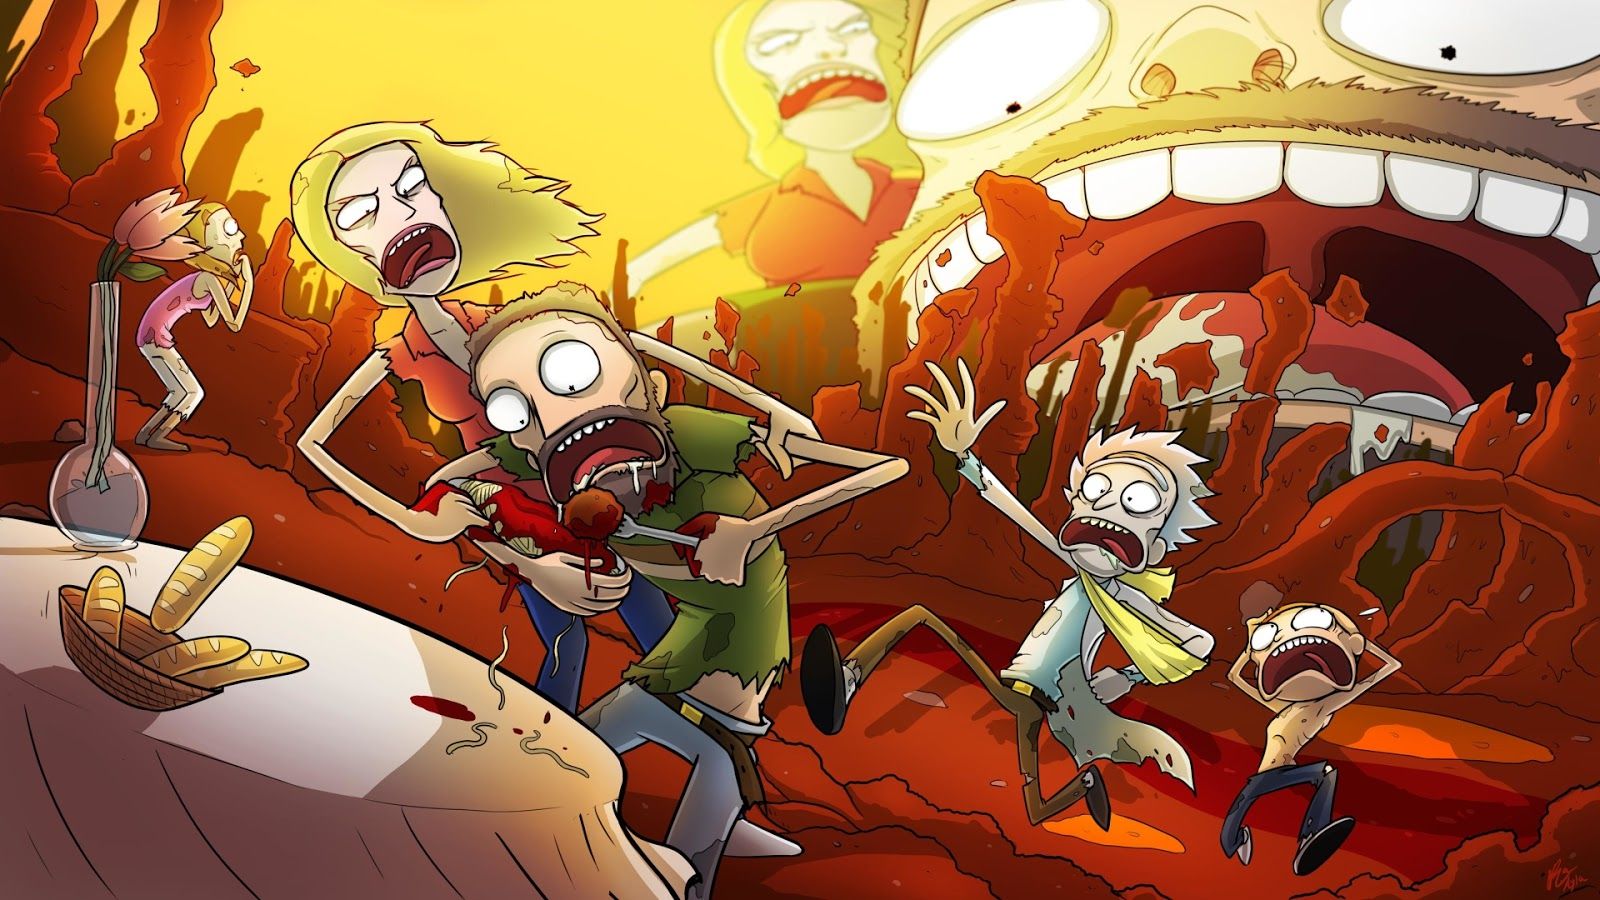 Rick  Morty  Free Wallpapers for iPhone Android Desktop  Phone